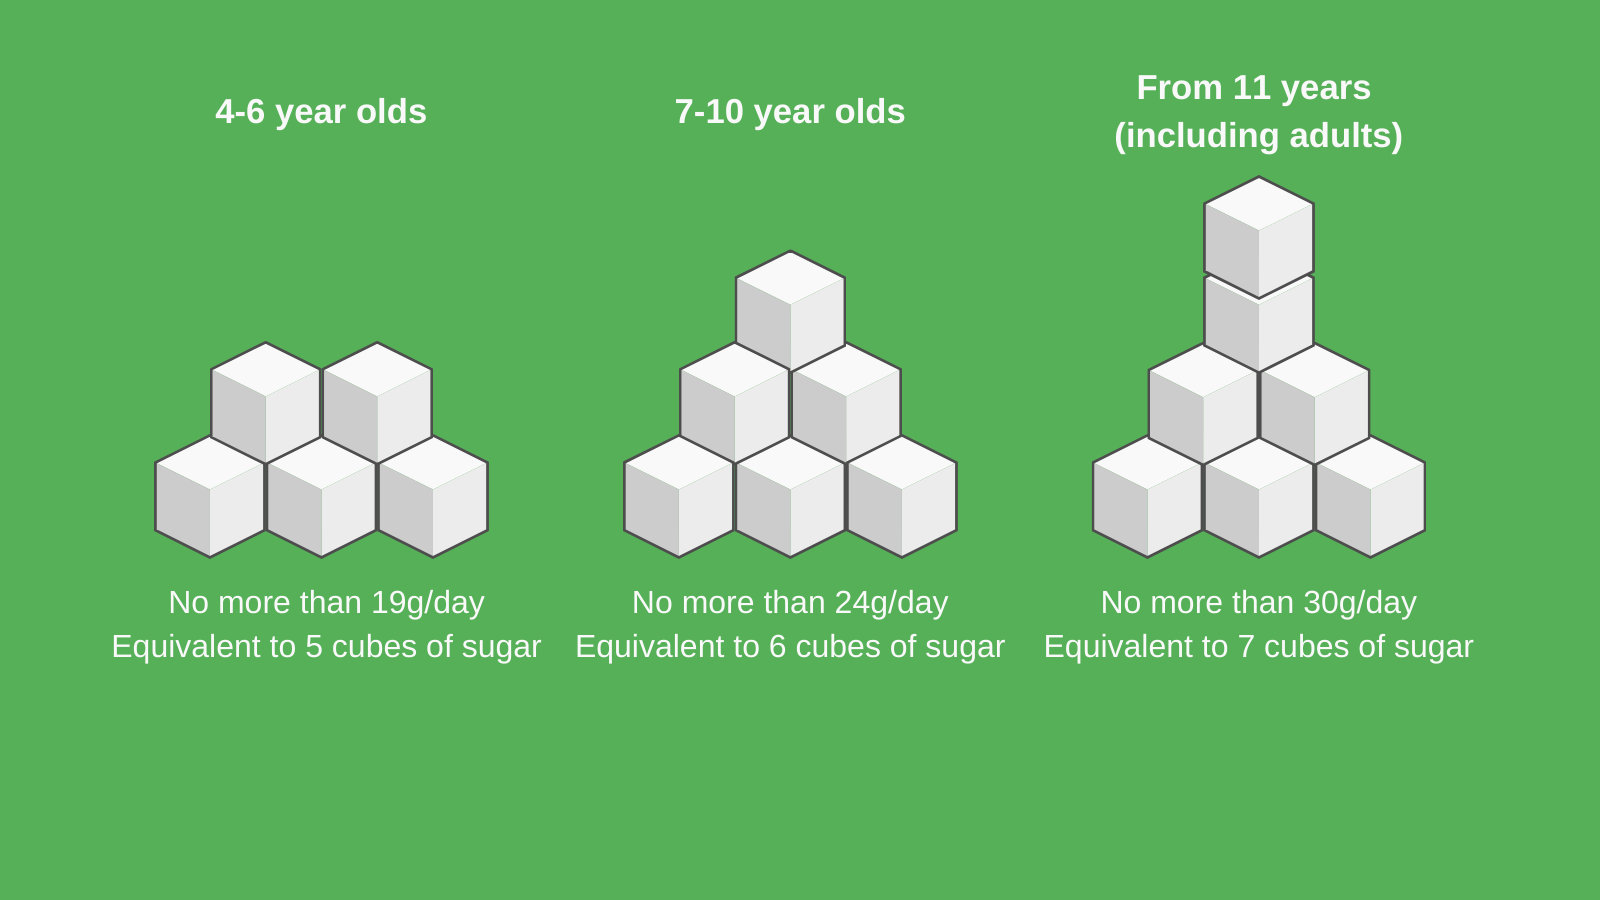 Graphic on 'free sugars. 4-6 year olds, no more than 19g/day (equivalent to 5 cubes of sugar; 7-10 year olds, no more than 24g/day (equivalent to 6 cubes of sugar), 11 years+, no more than 30g/day (equivalent to 7 cubes of sugar)